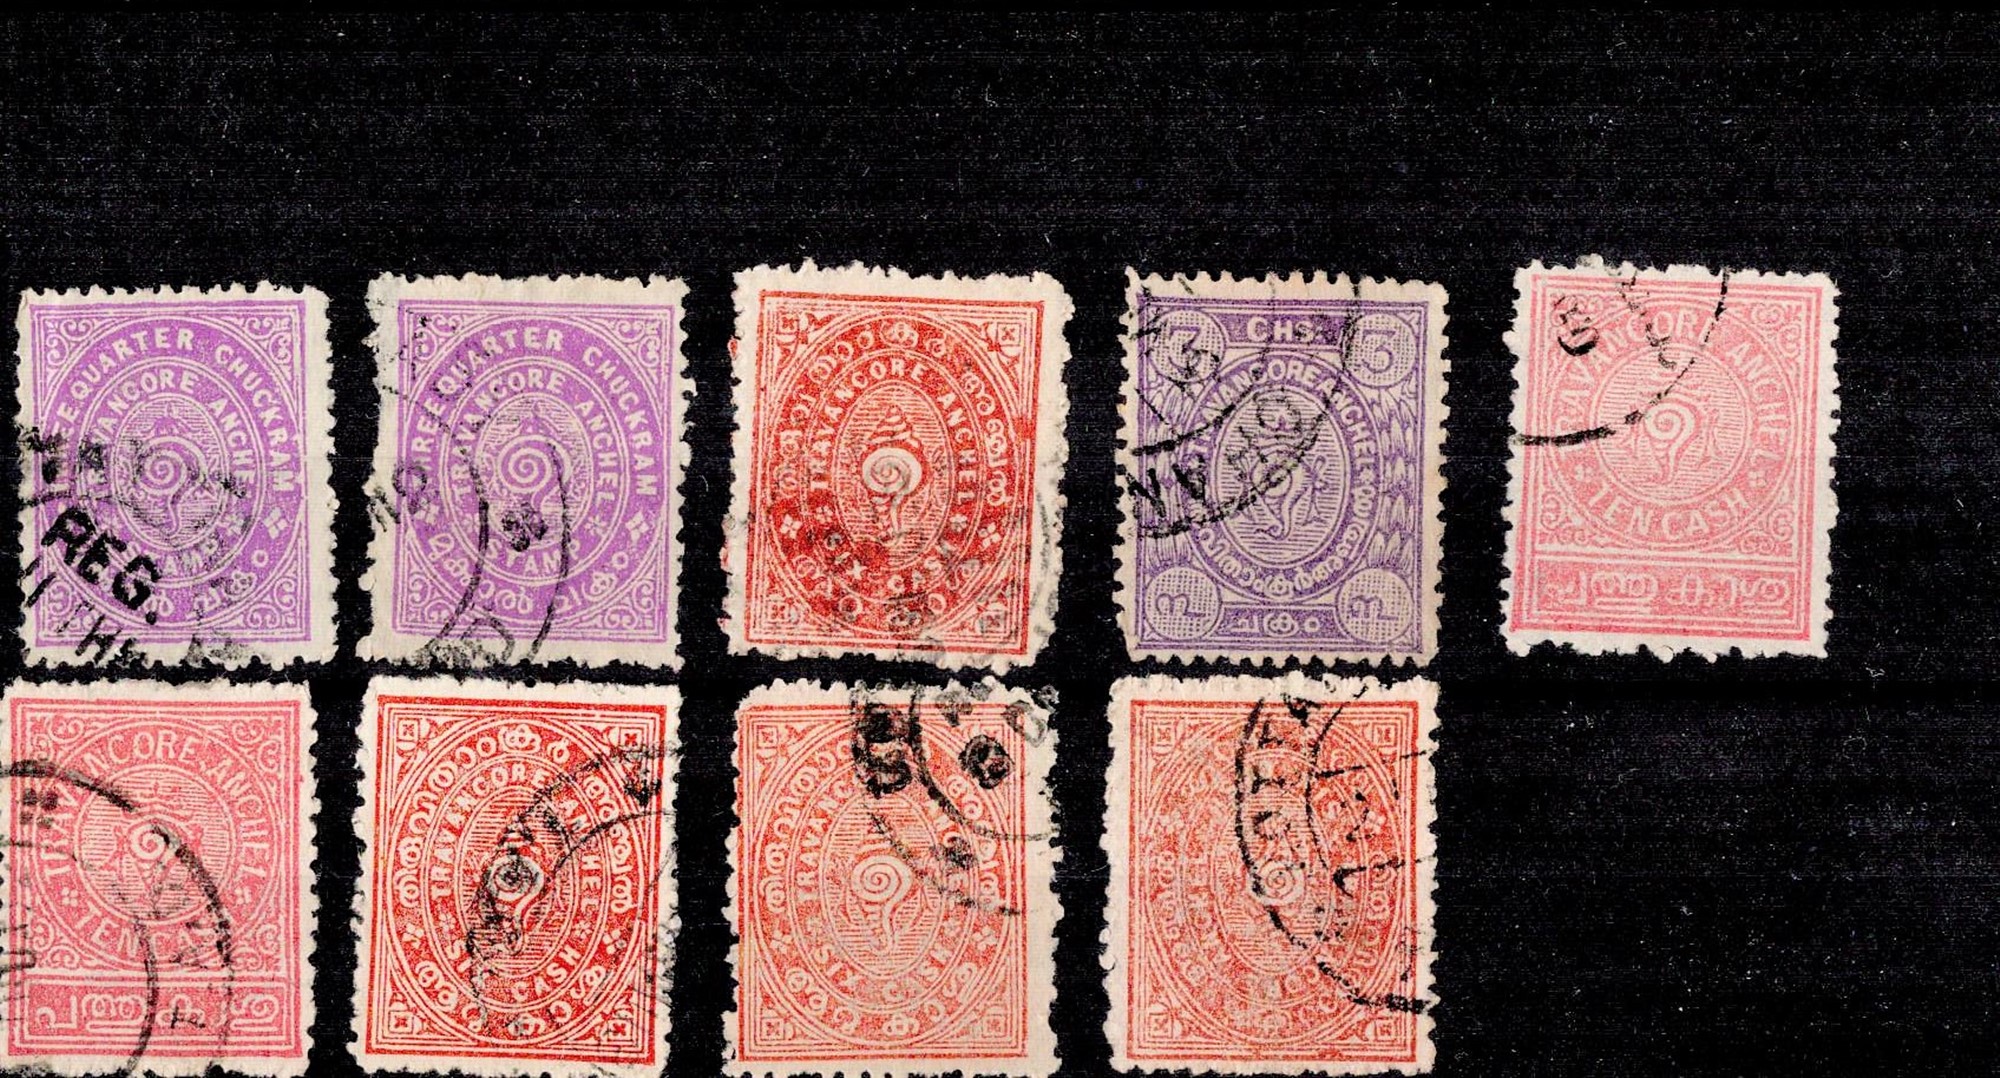 Pre 1936 Travancore 9 Stamps. Good condition. We combine postage on multiple winning lots and can